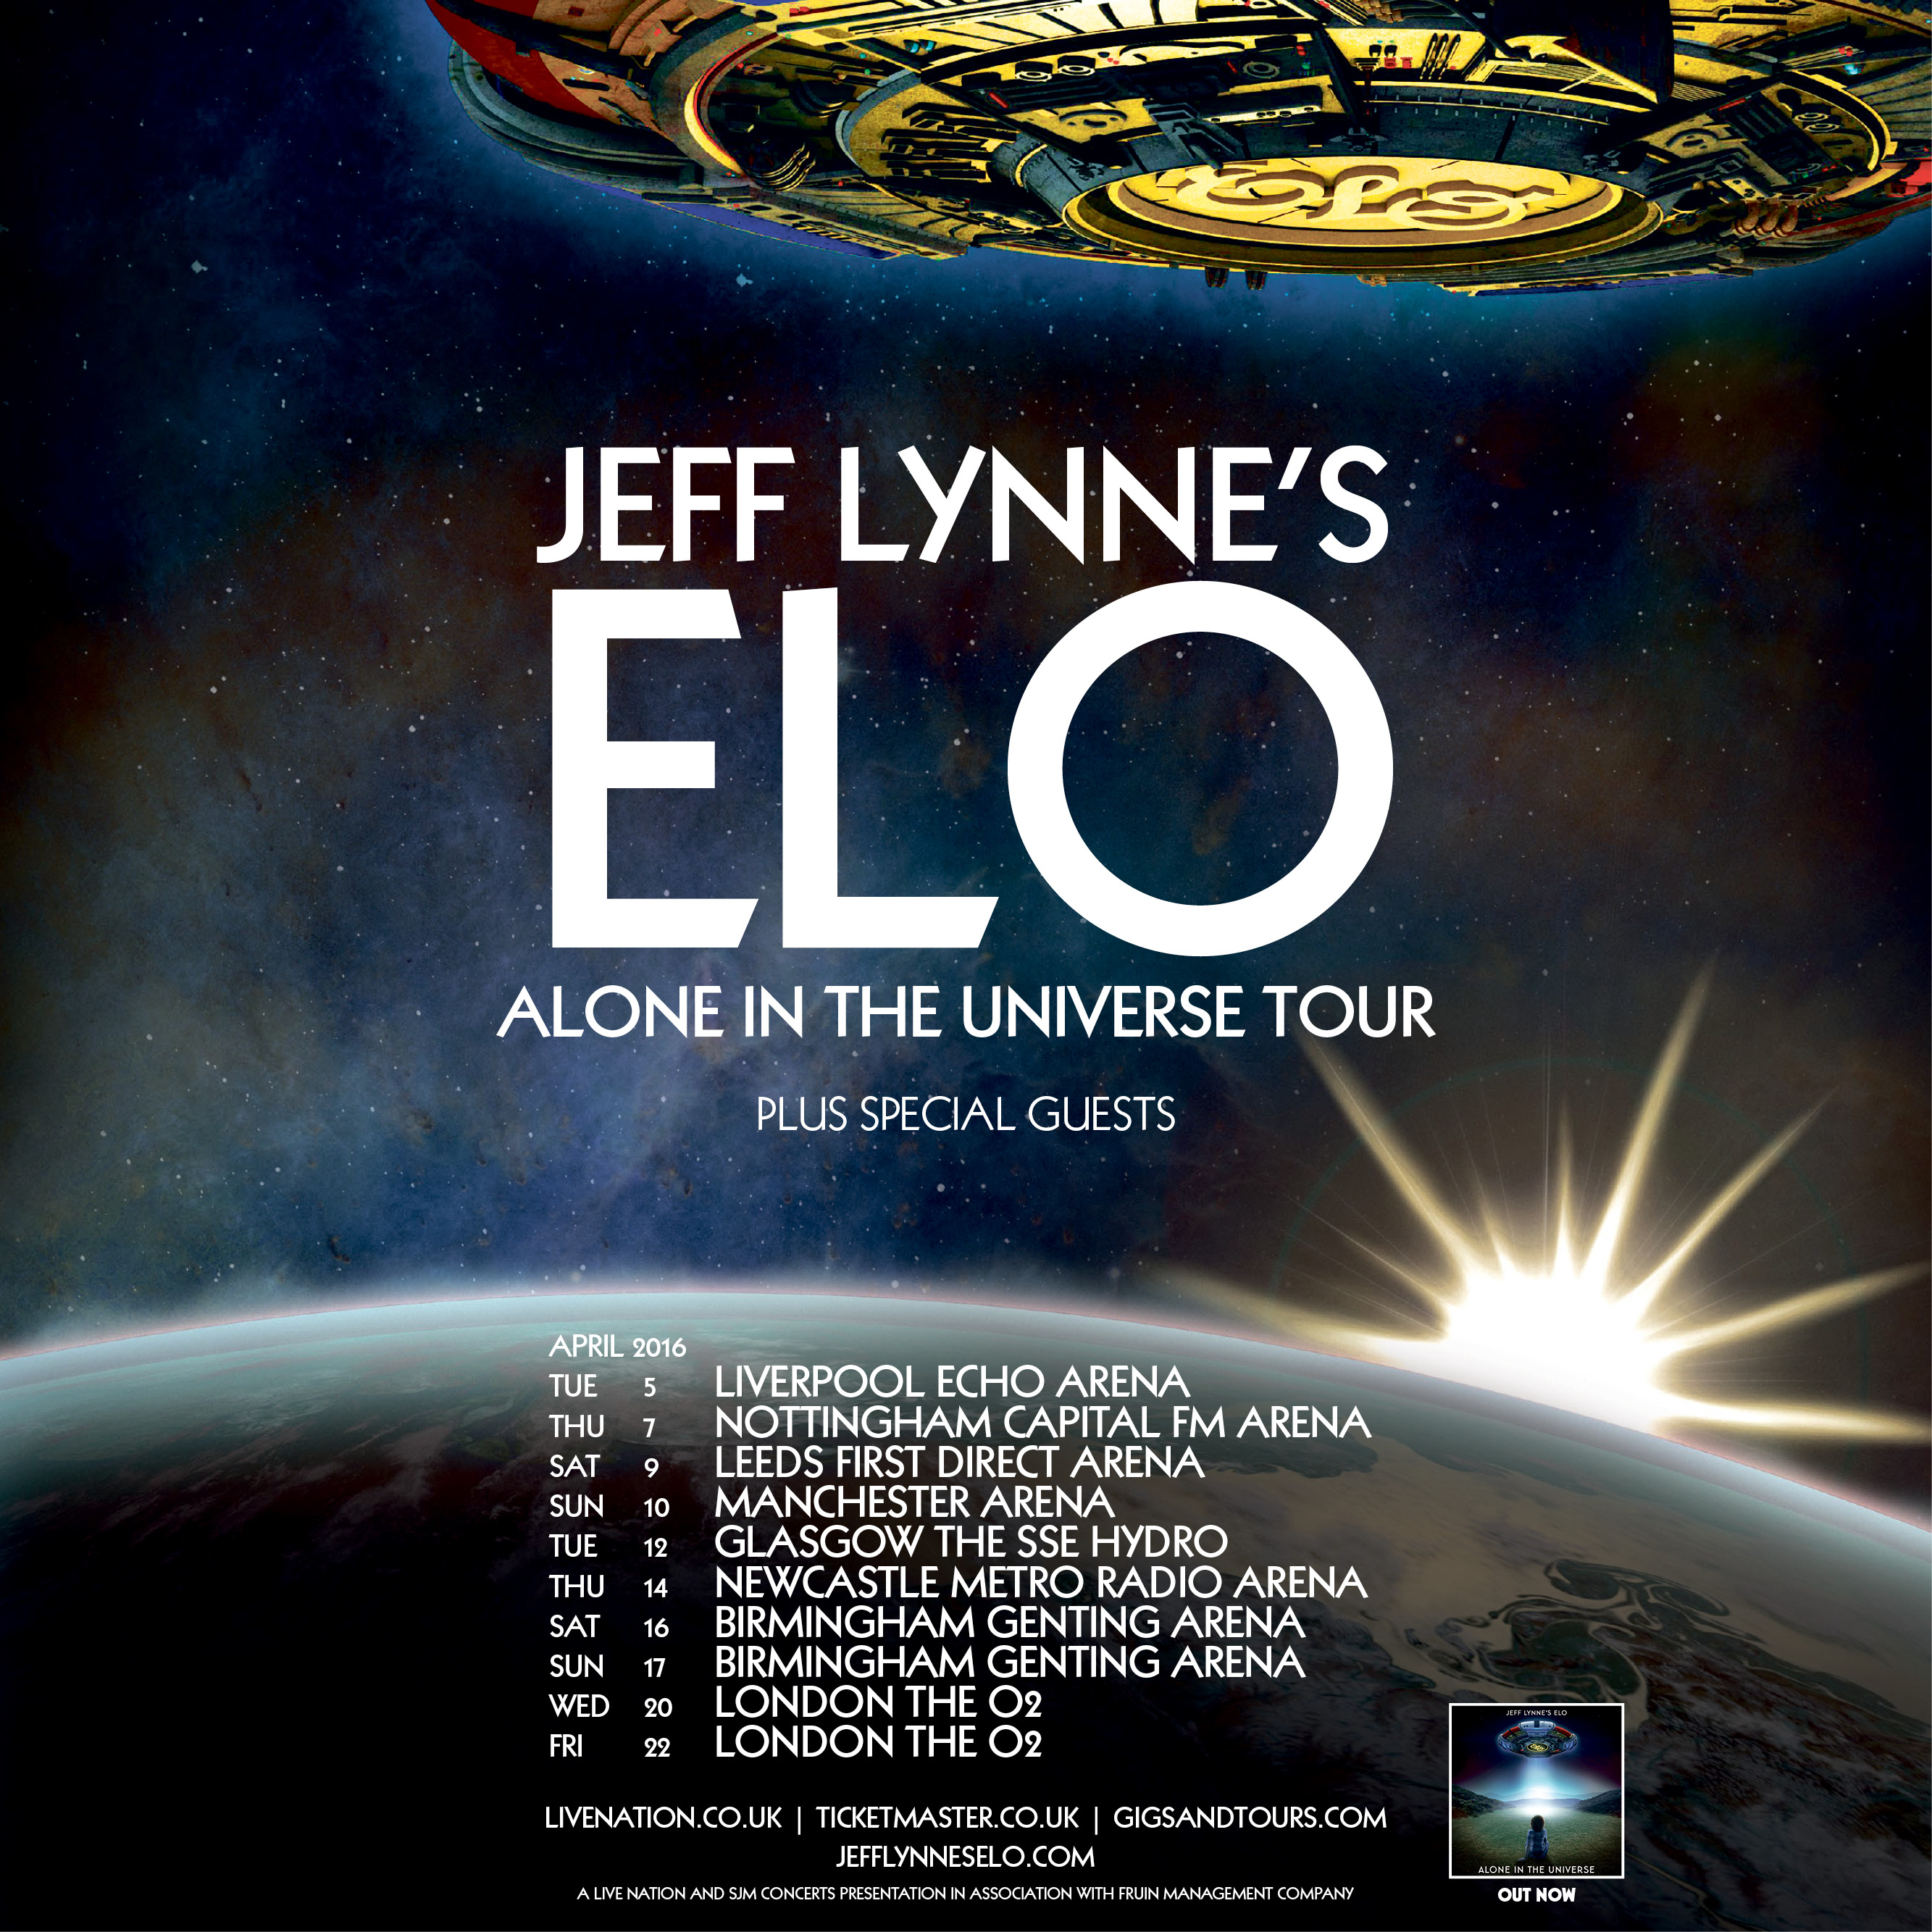 It's official, Jeff Lynne’s ELO to tour in April 2016!